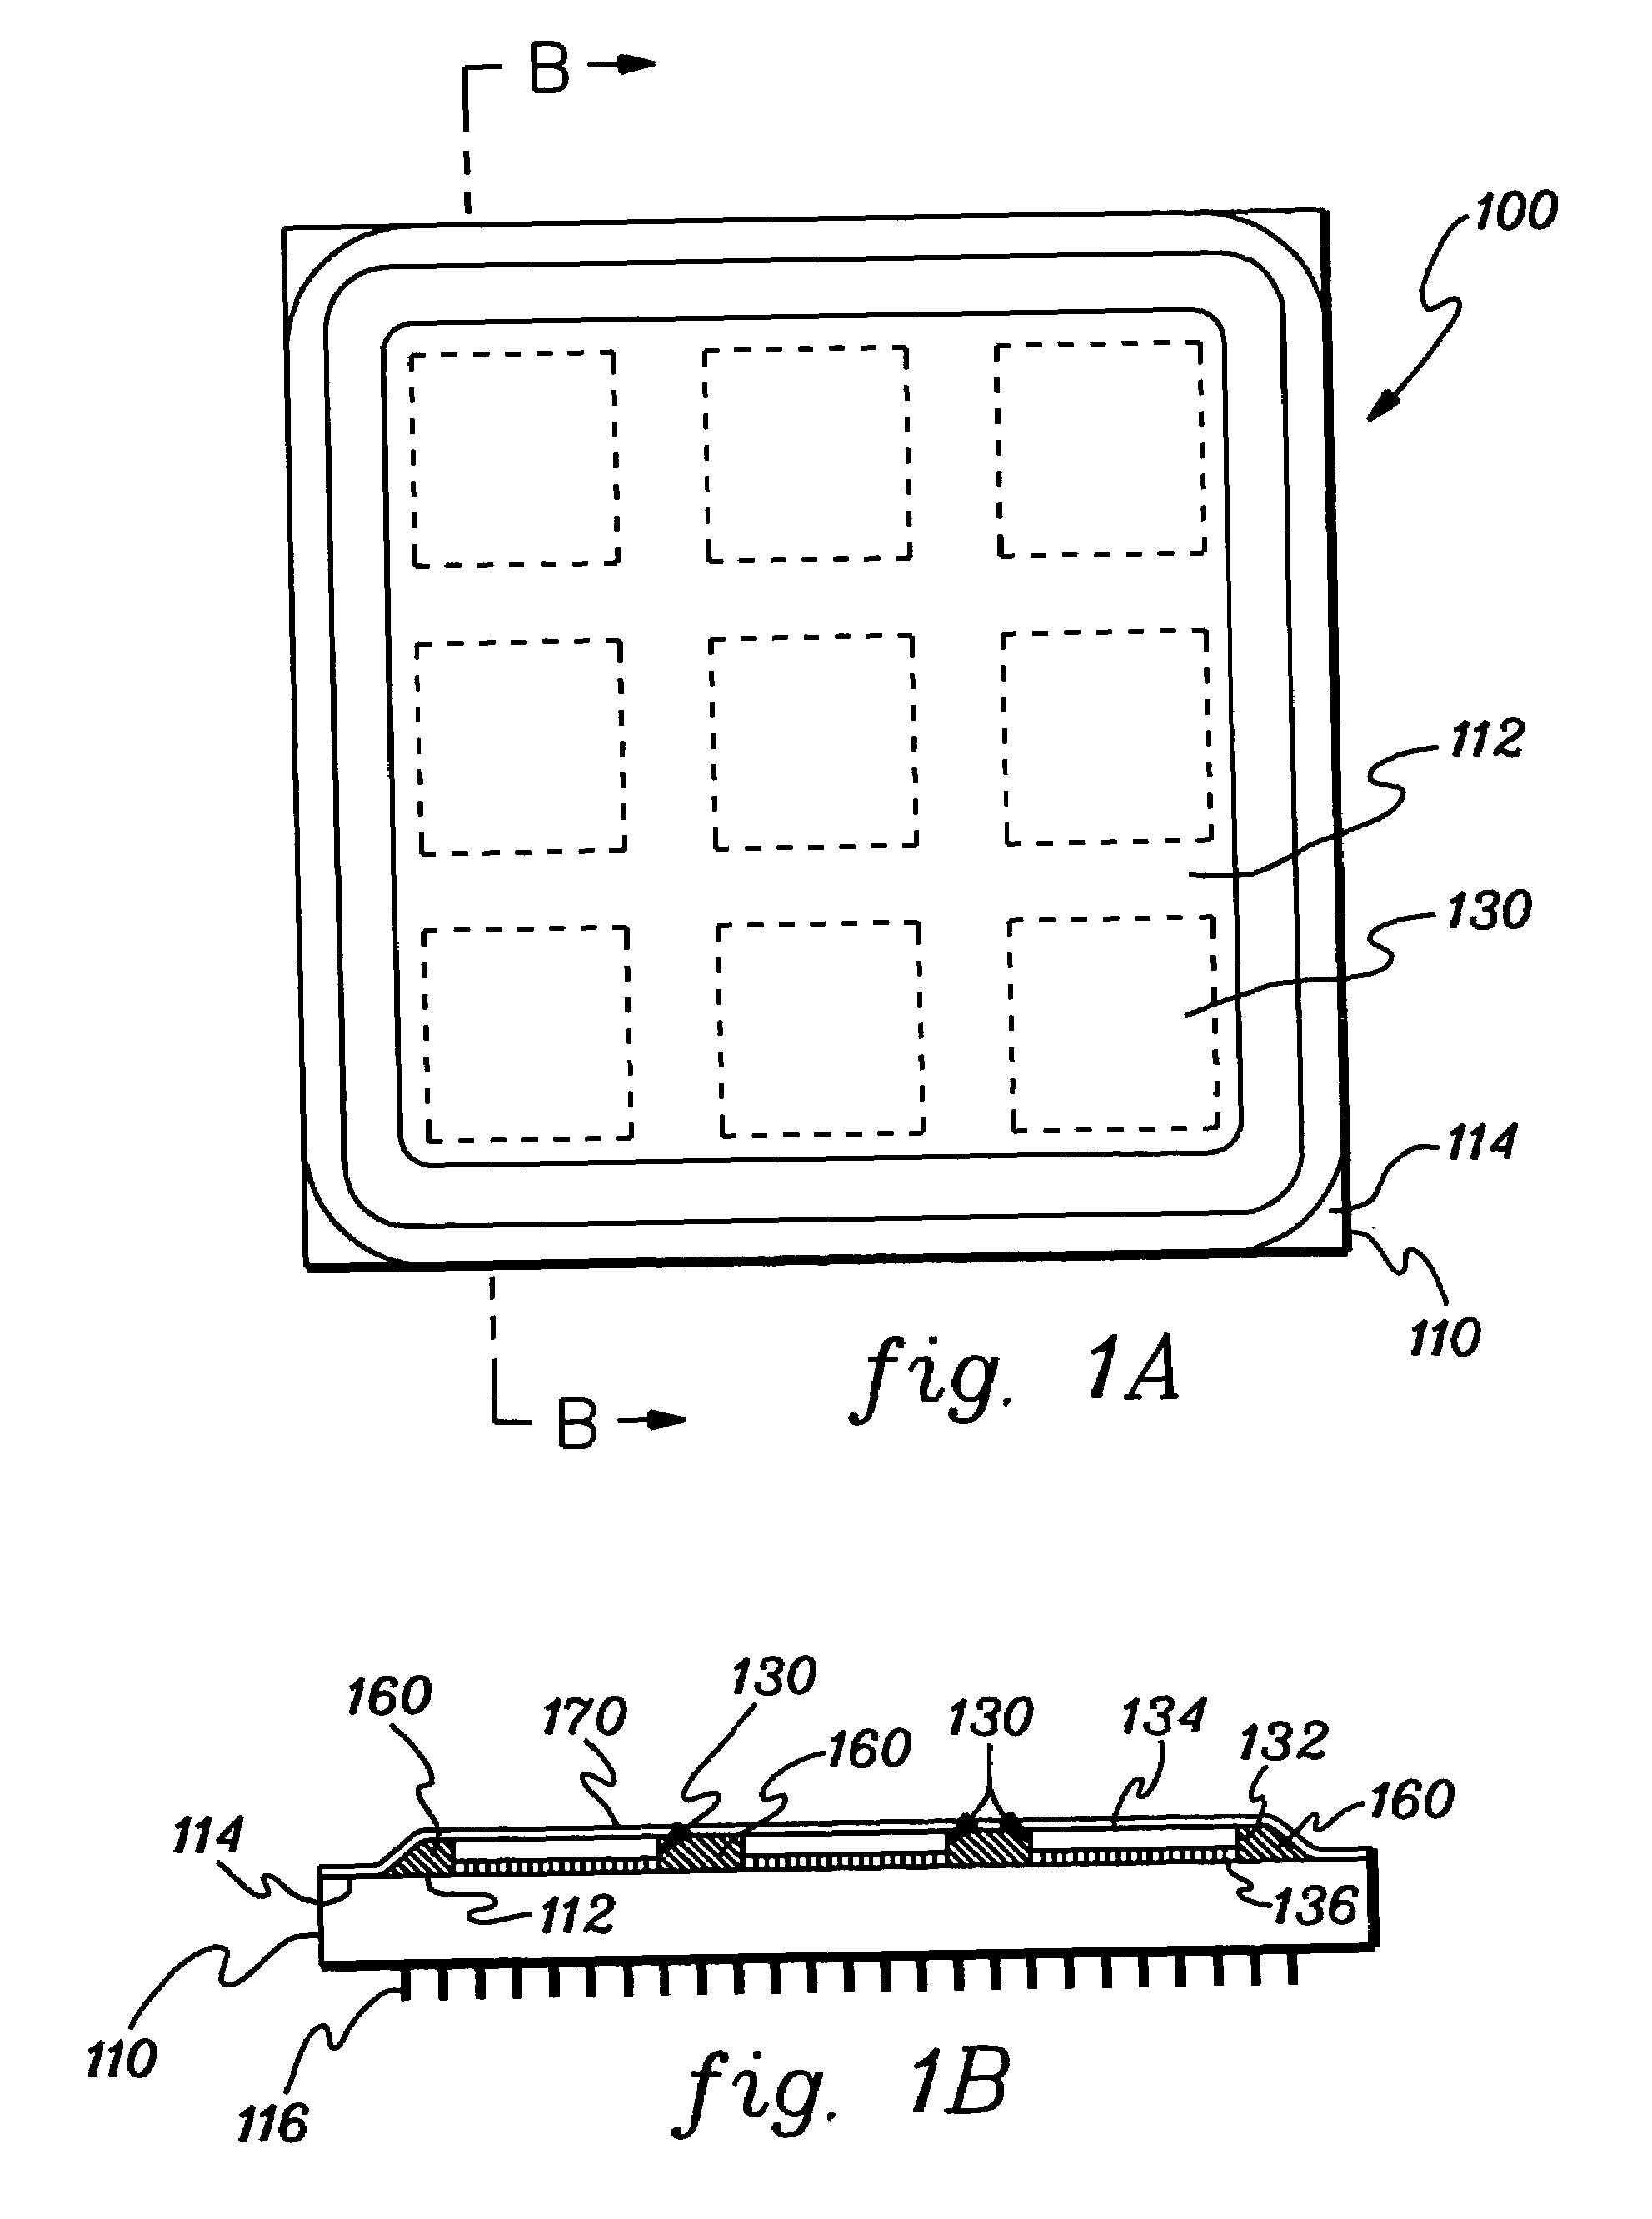 Electronic device cooling assembly and method employing elastic support material holding a plurality of thermally conductive pins